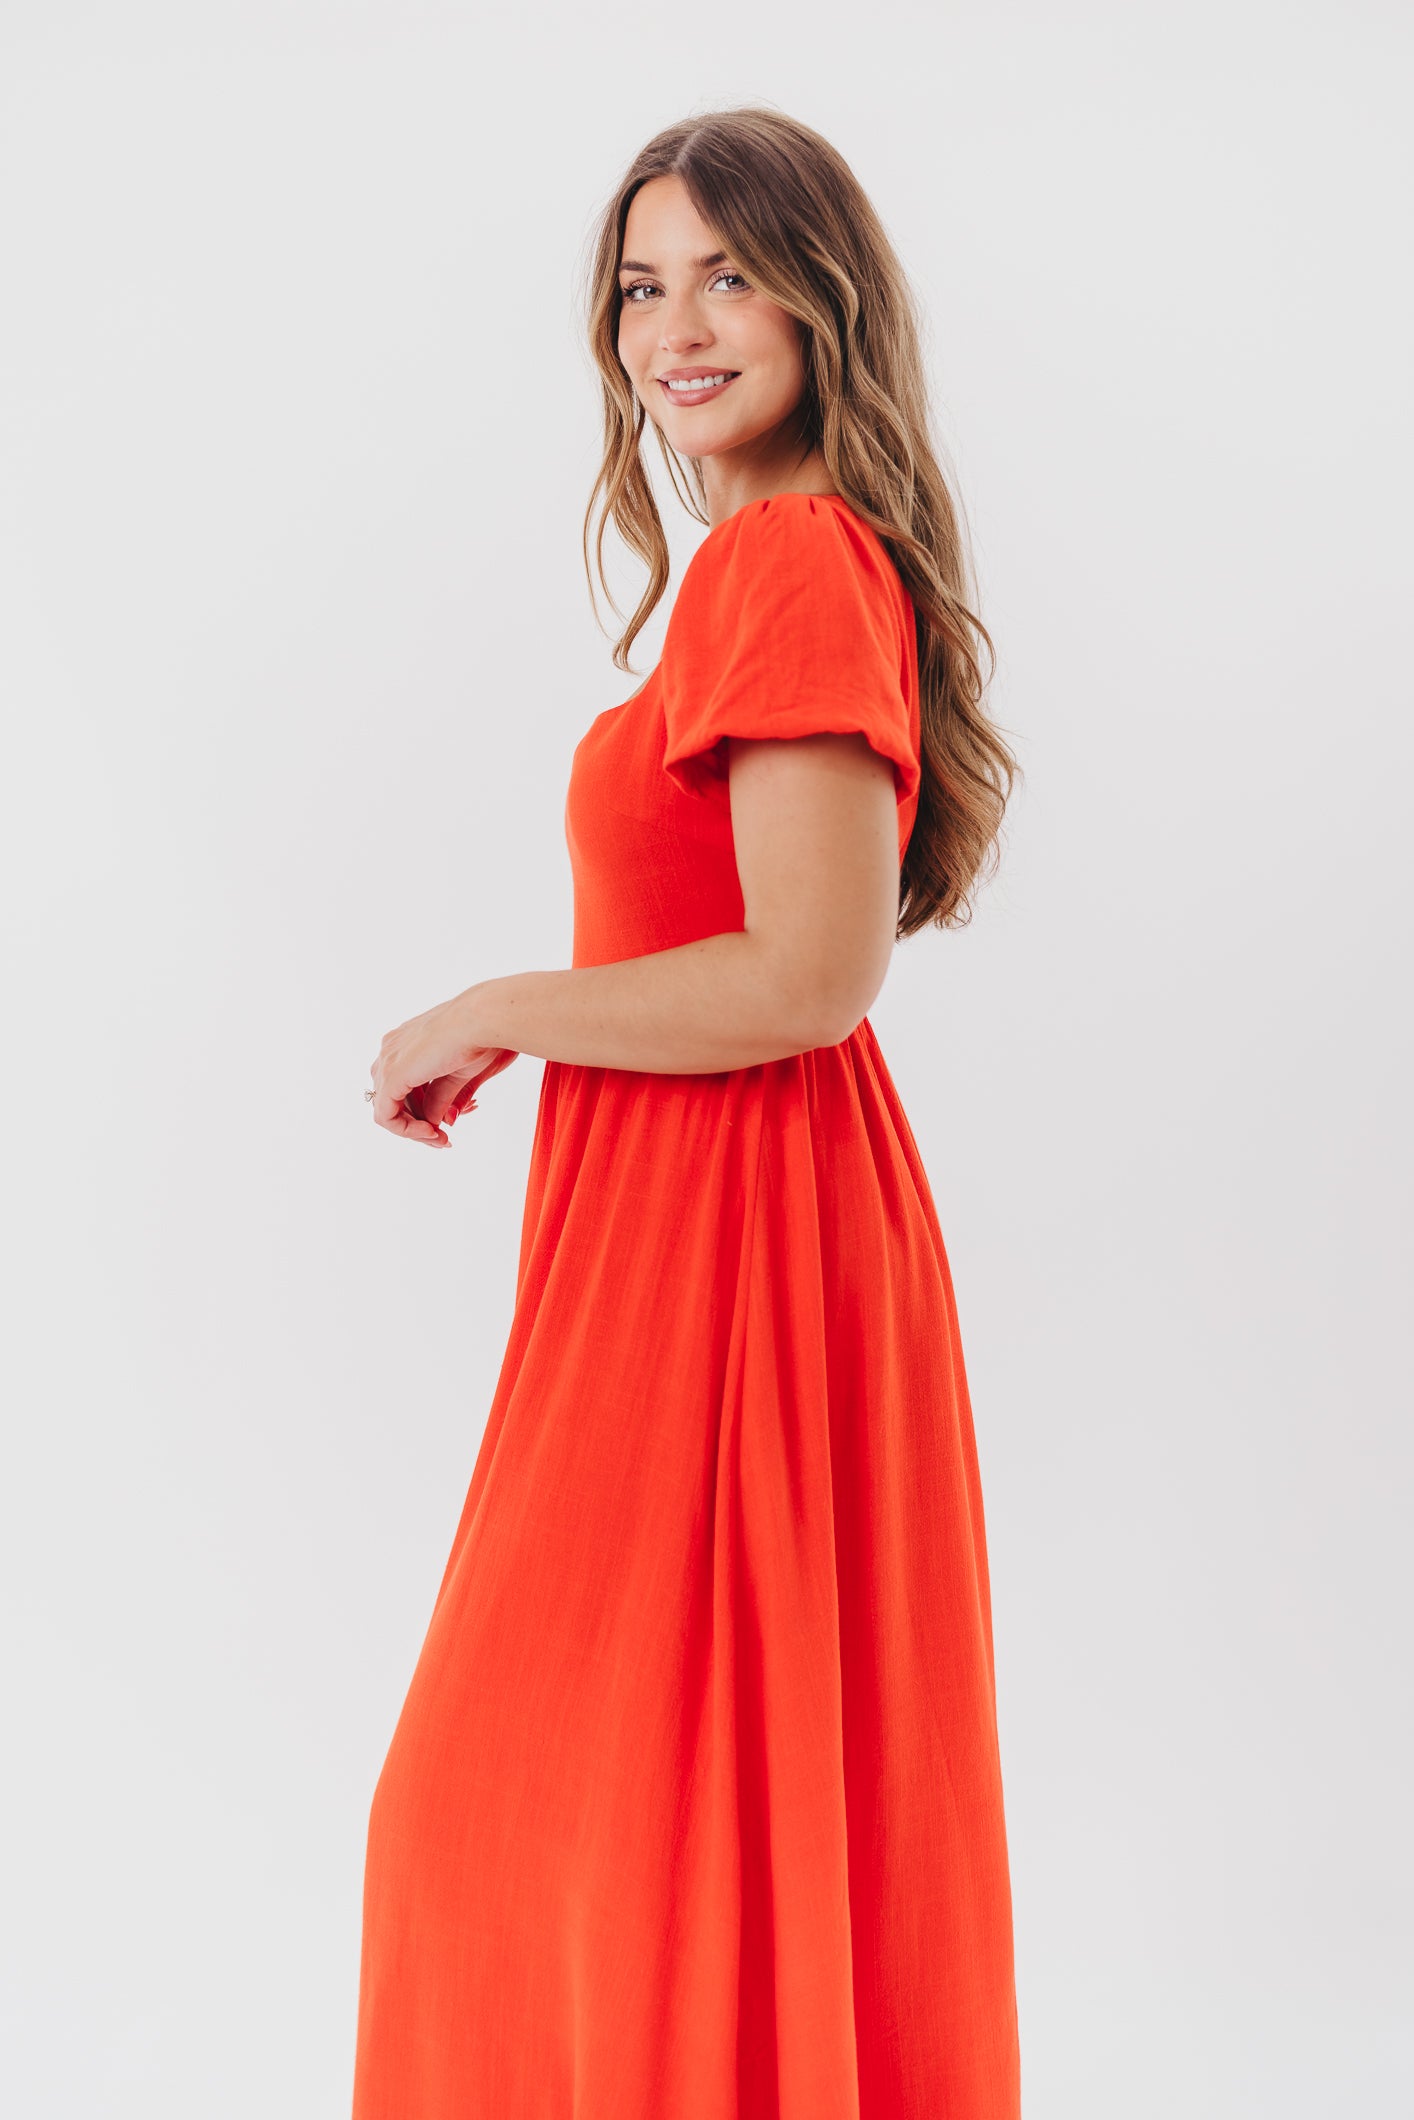 Ainsley Square Neck Midi Dress with Puffed Sleeves in Red Poppy - Bump Friendly & Inclusive Sizing (S-3XL)